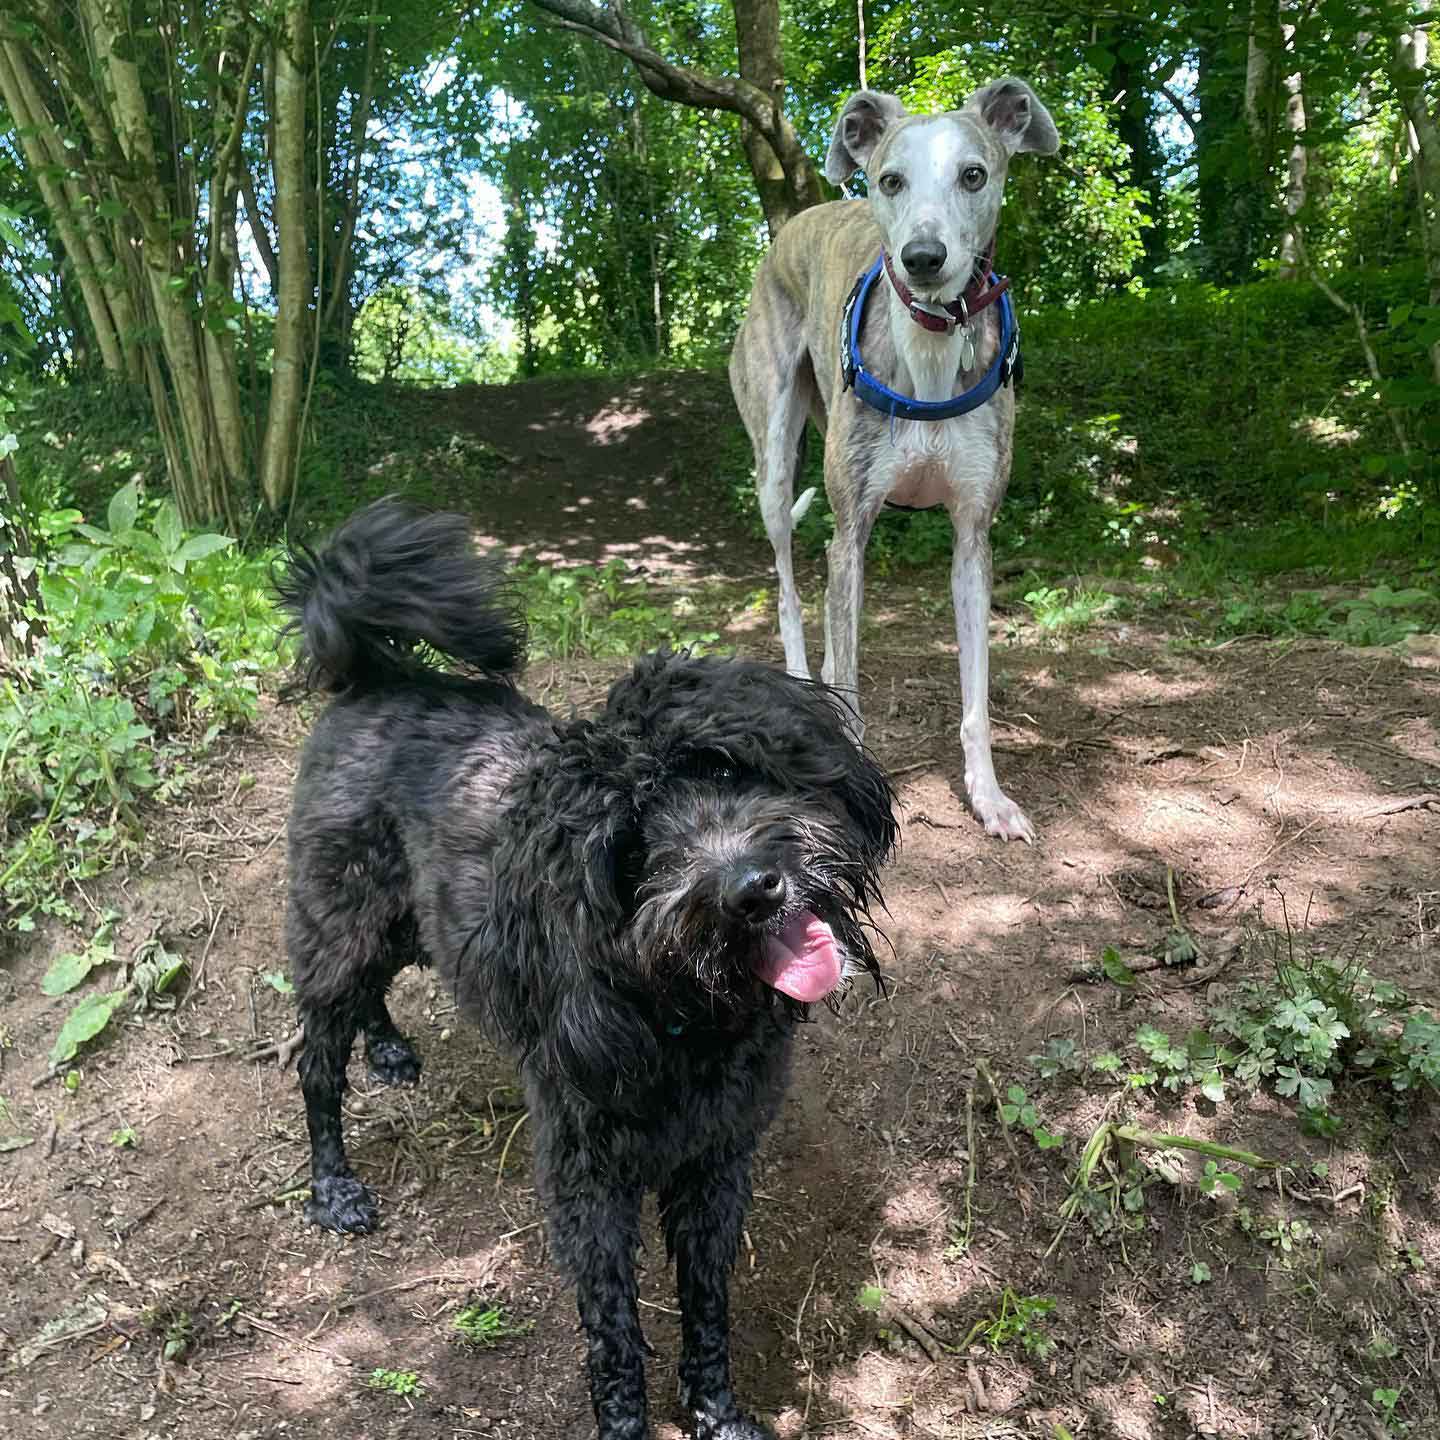 A Lurcher and Colliepoo standing in a wooded area